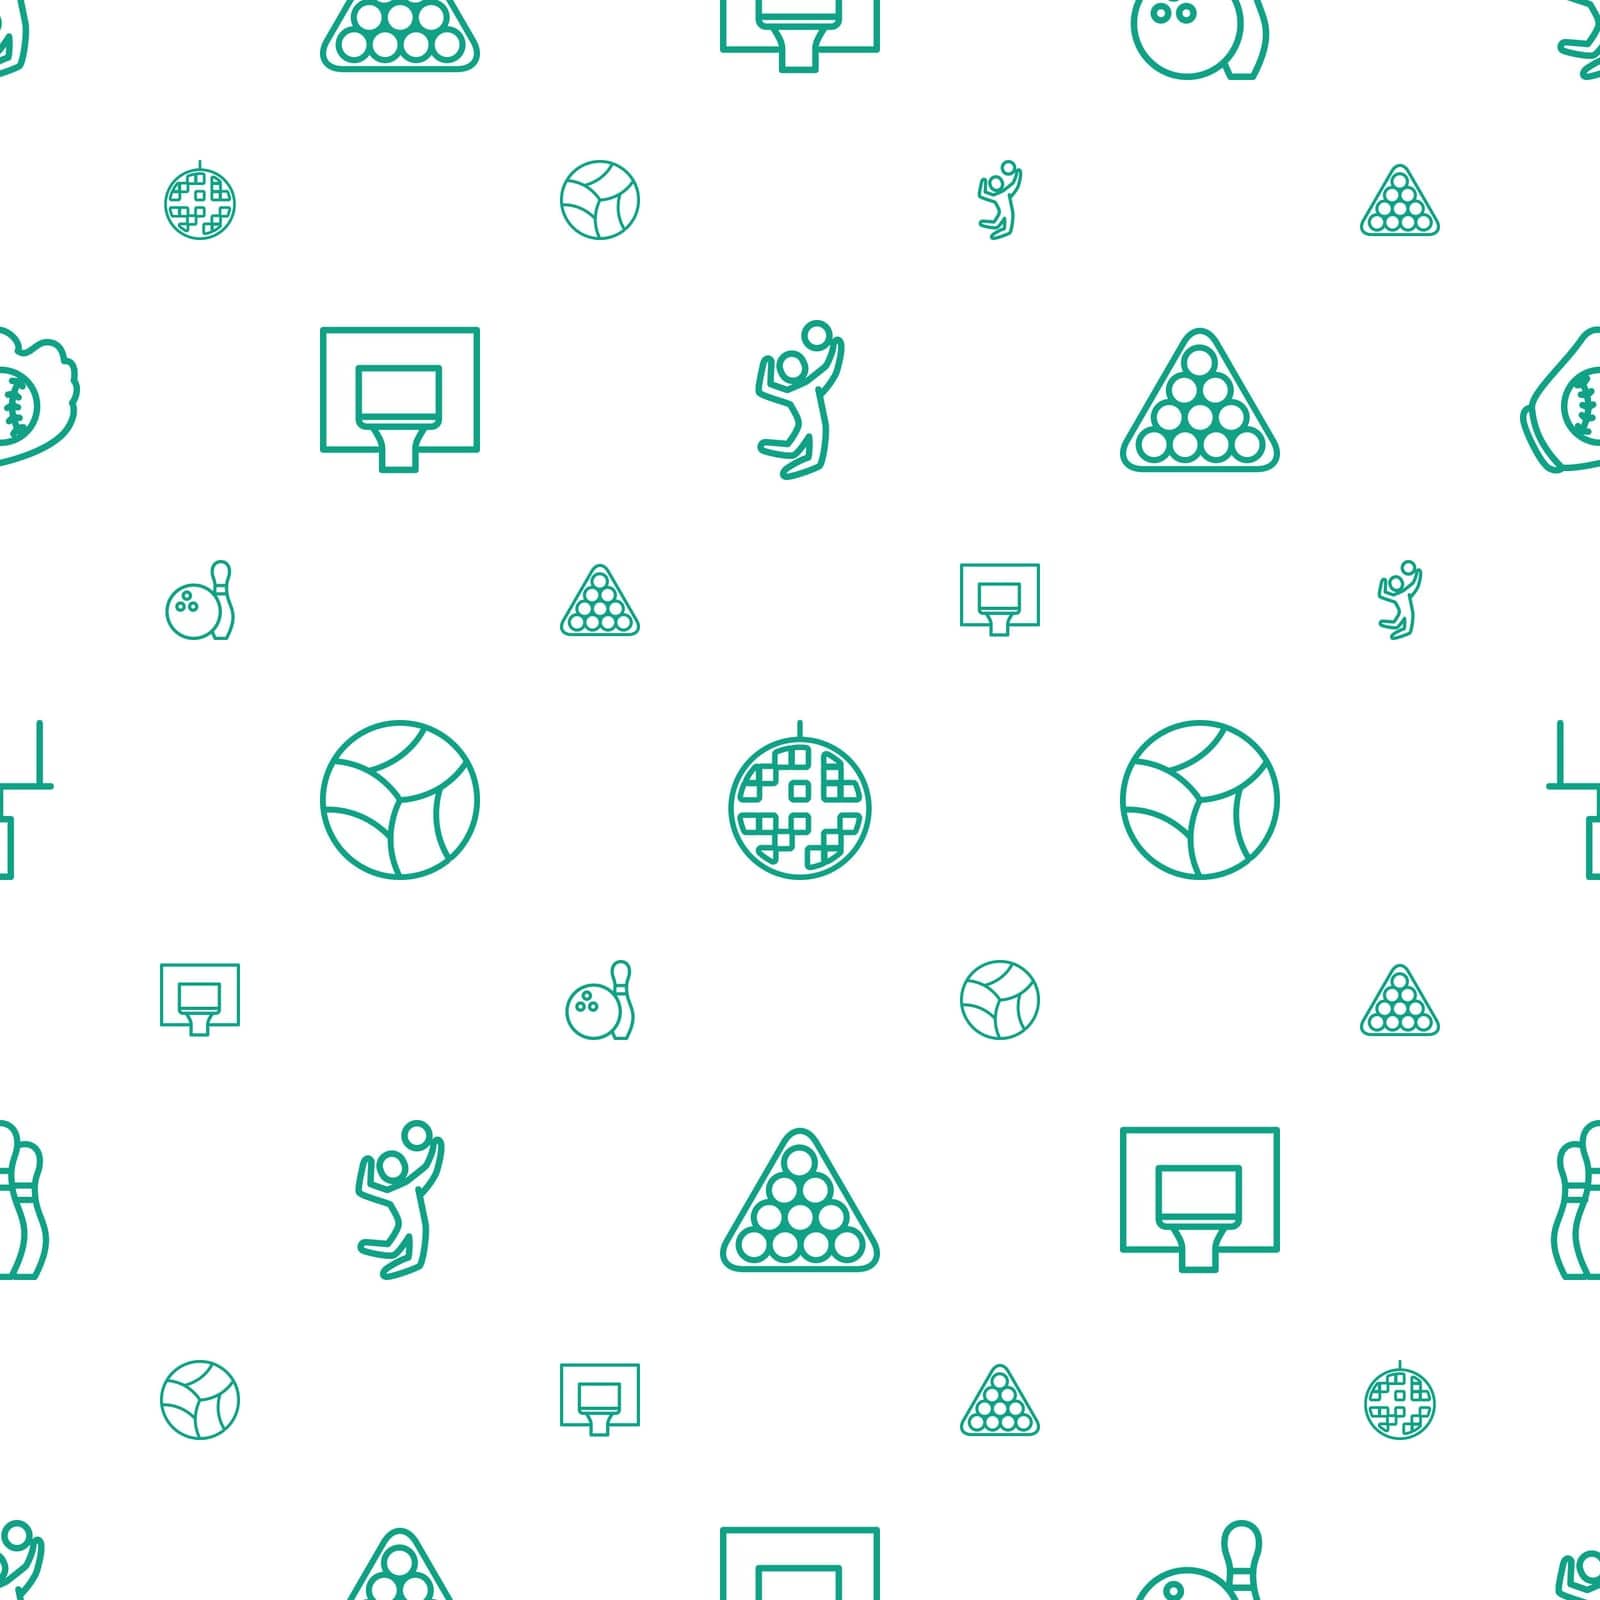 play,symbol,basket,game,line,glove,pattern,icon,sign,disco,isolated,competition,bowling,ball,basketball,white,post,design,vector,decoration,leisure,graphic,player,element,goal,recreation,league,equipment,team,billiards,round,background,beach,silhouette,baseball,volleyball,illustration,sport,fun,object,hobby